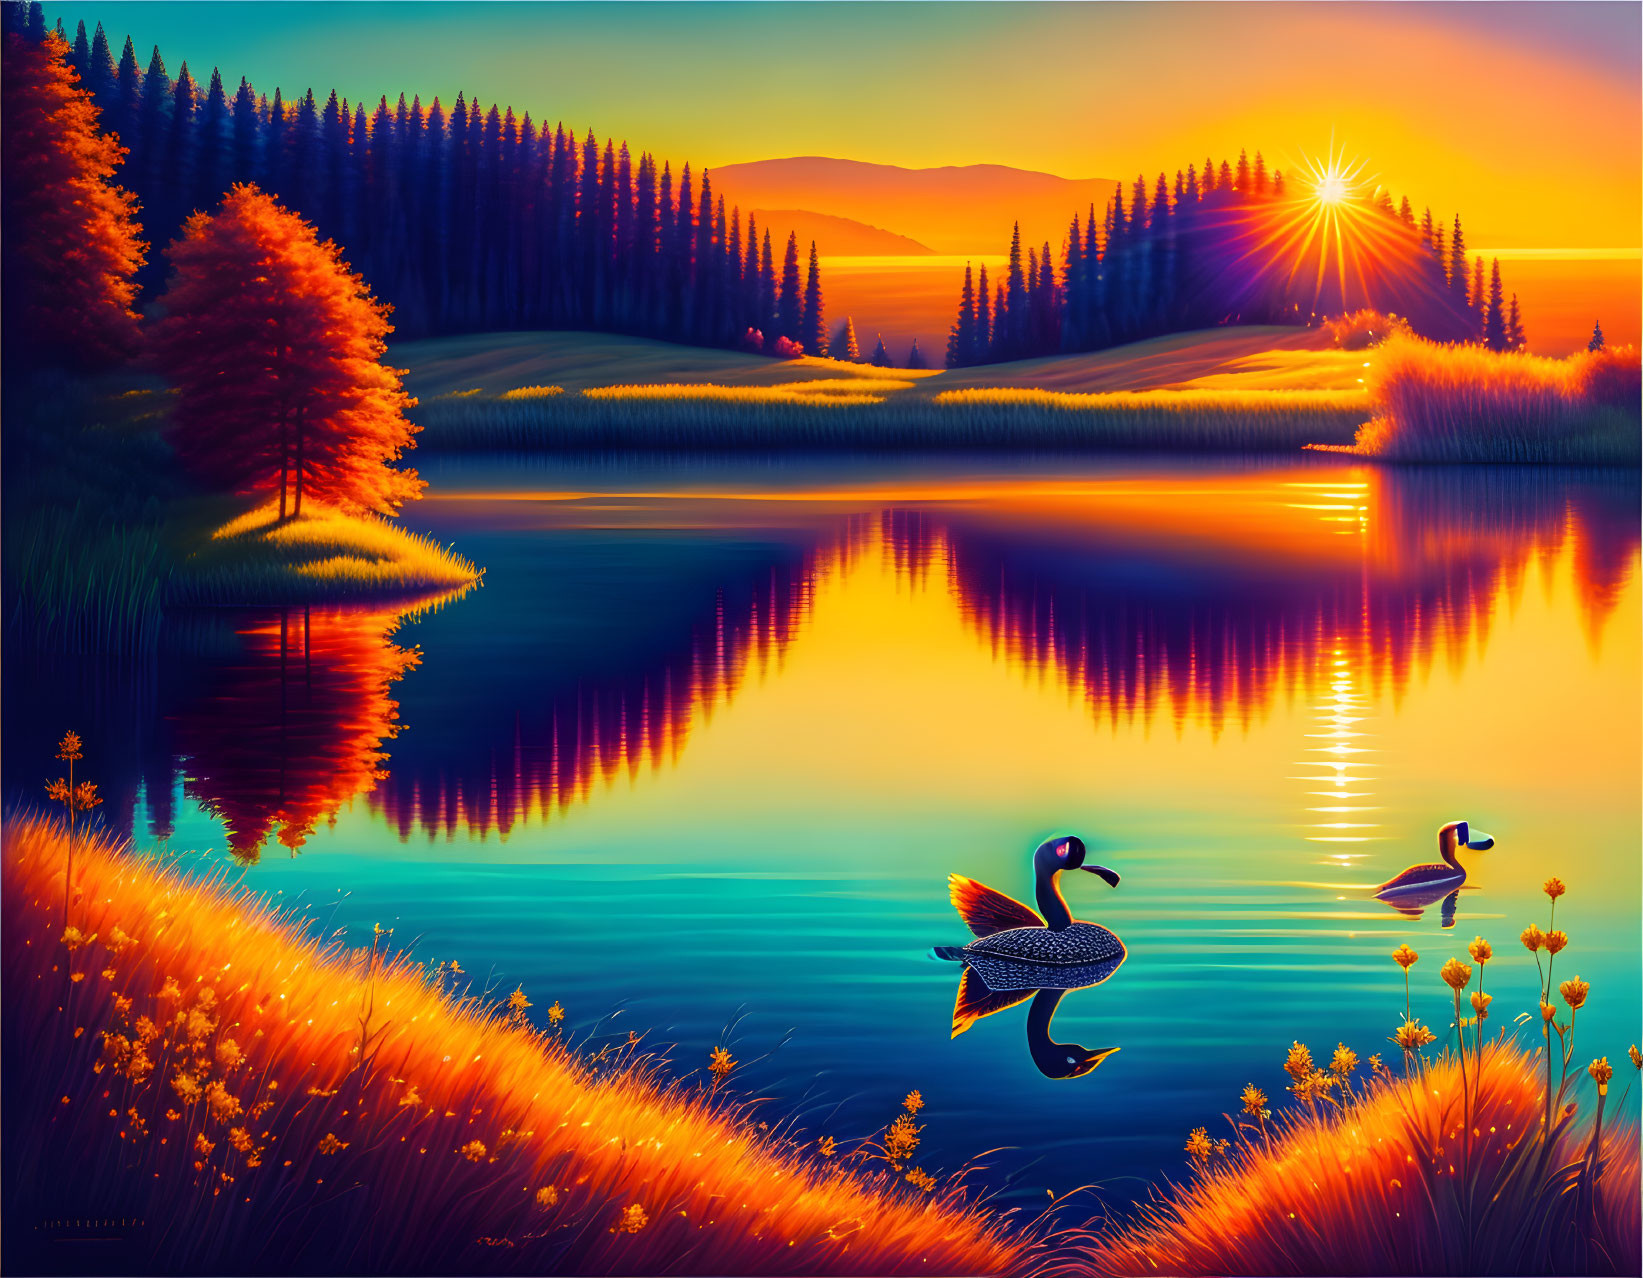 Serene lake landscape at sunset with ducks, lush forests, and autumn trees